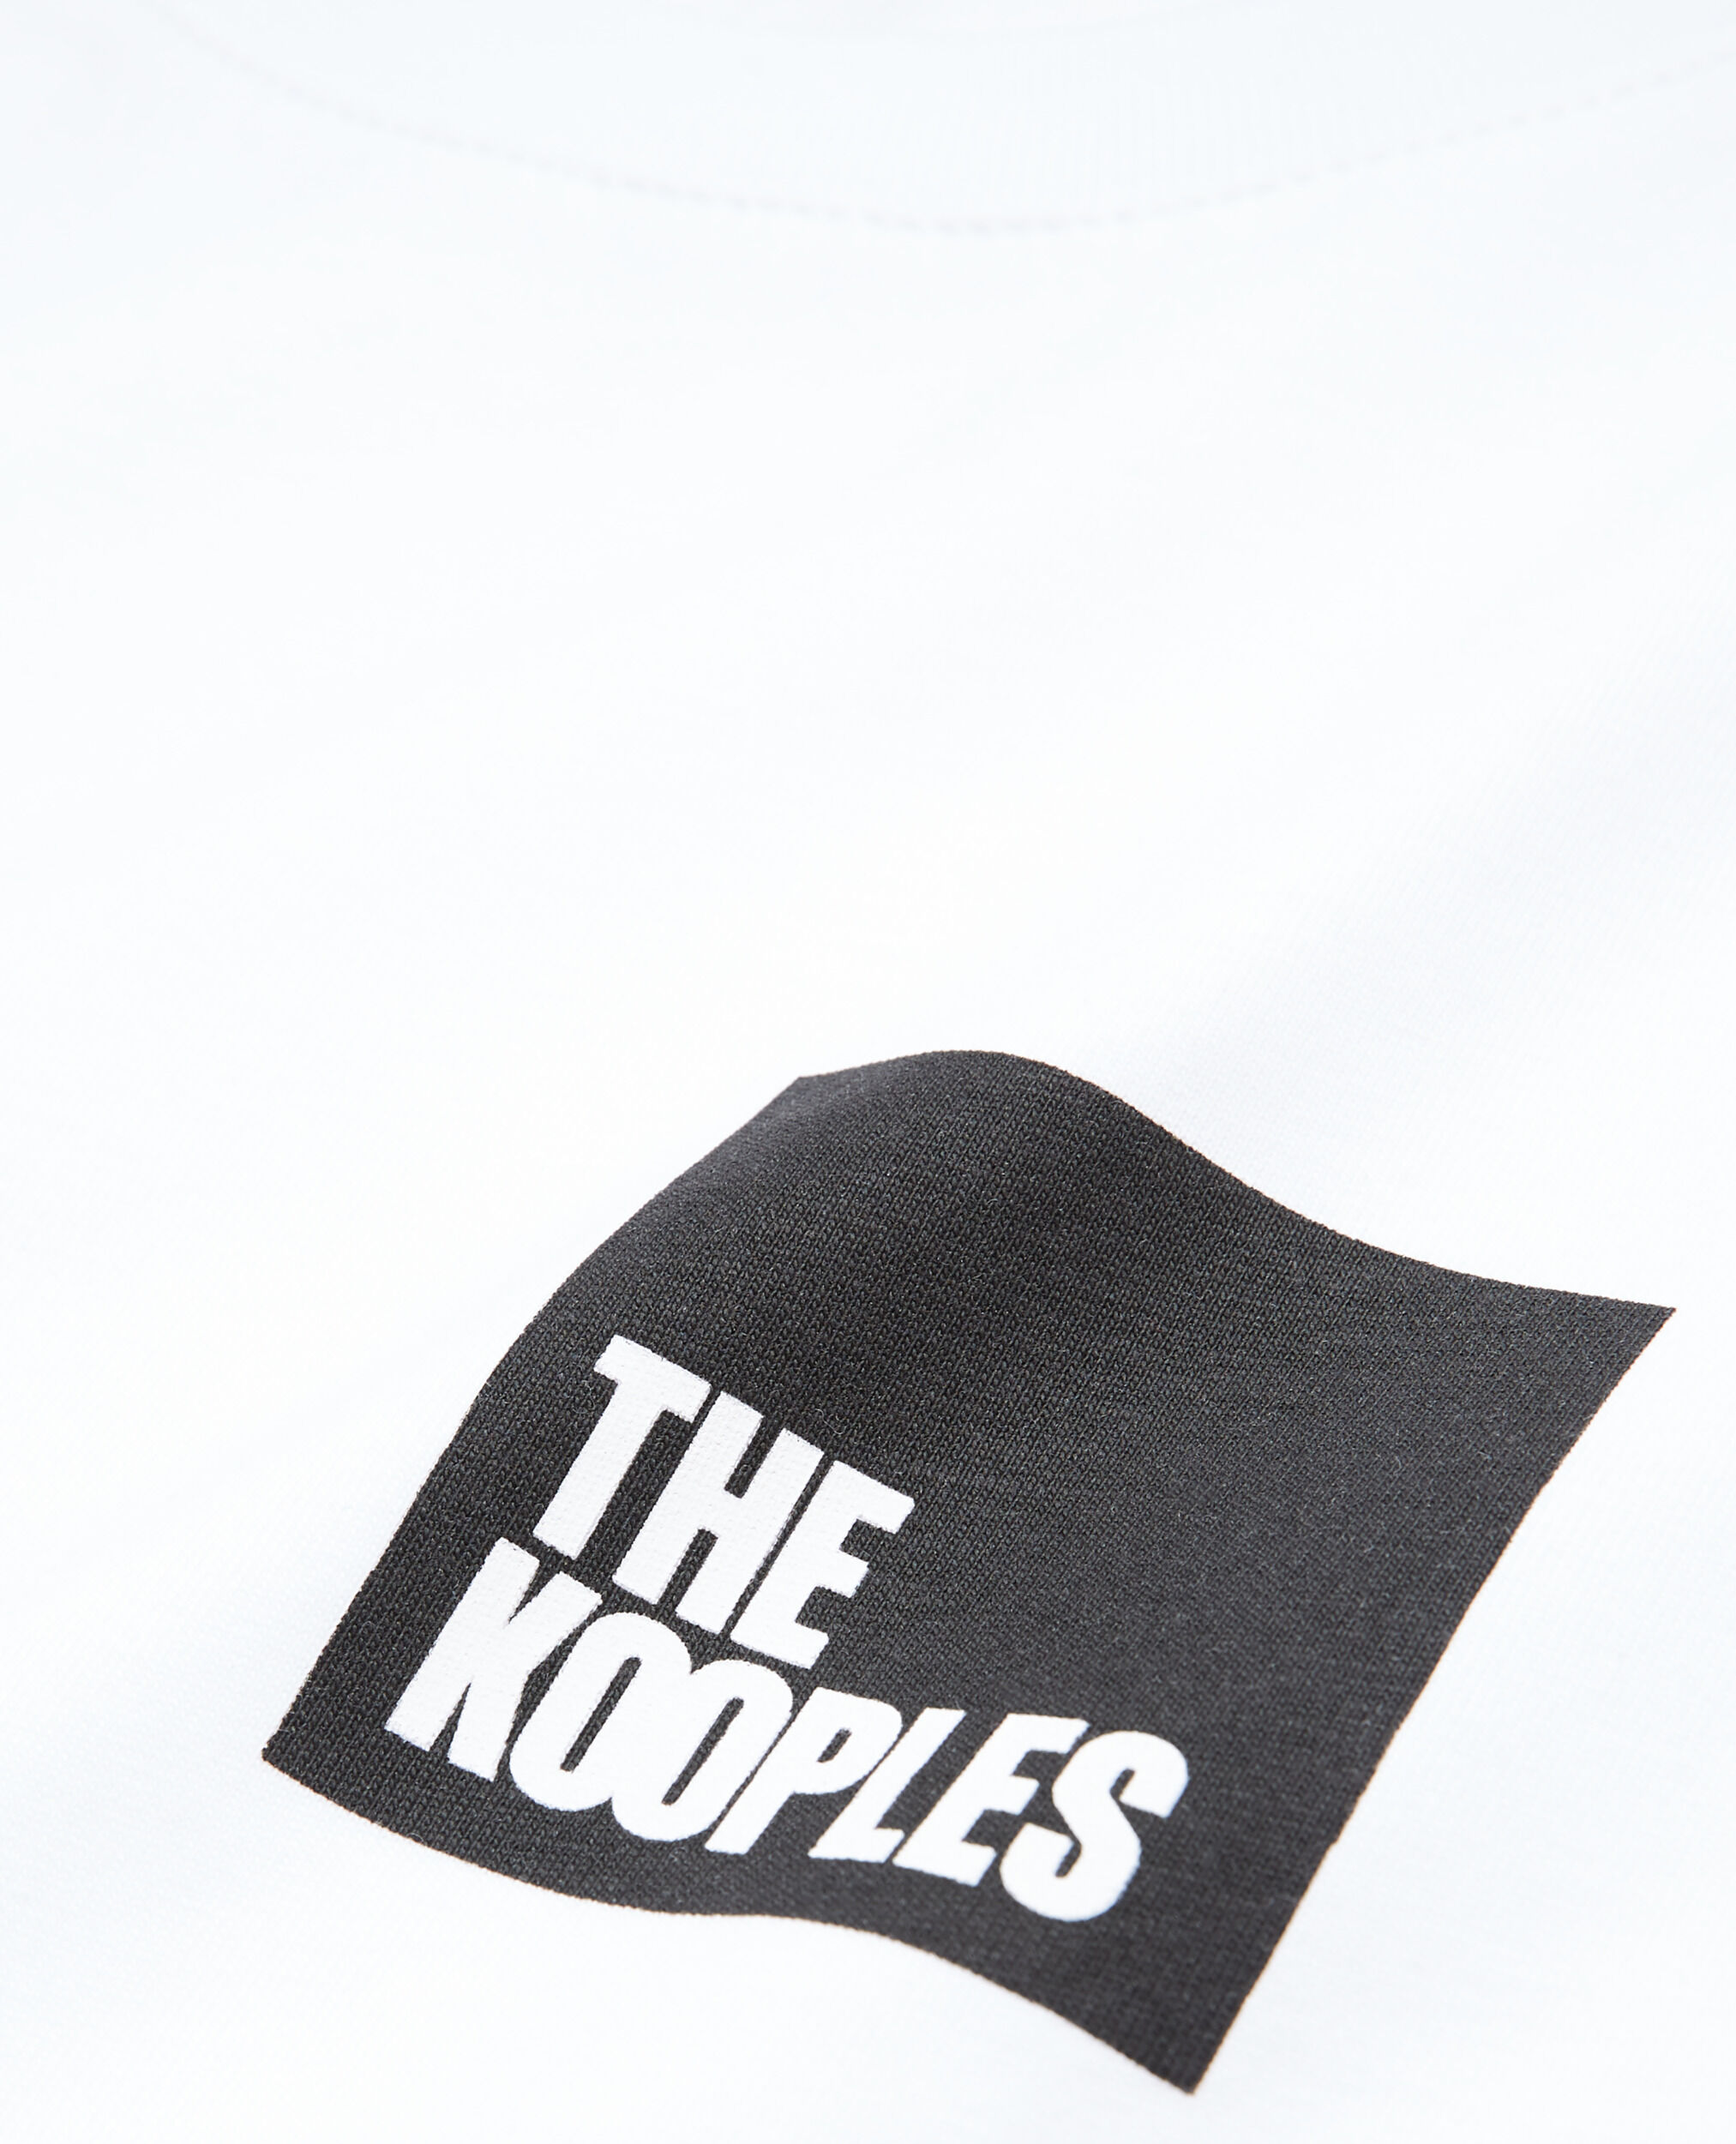 White T-shirt with The Kooples logo, SNOW WHITE, hi-res image number null